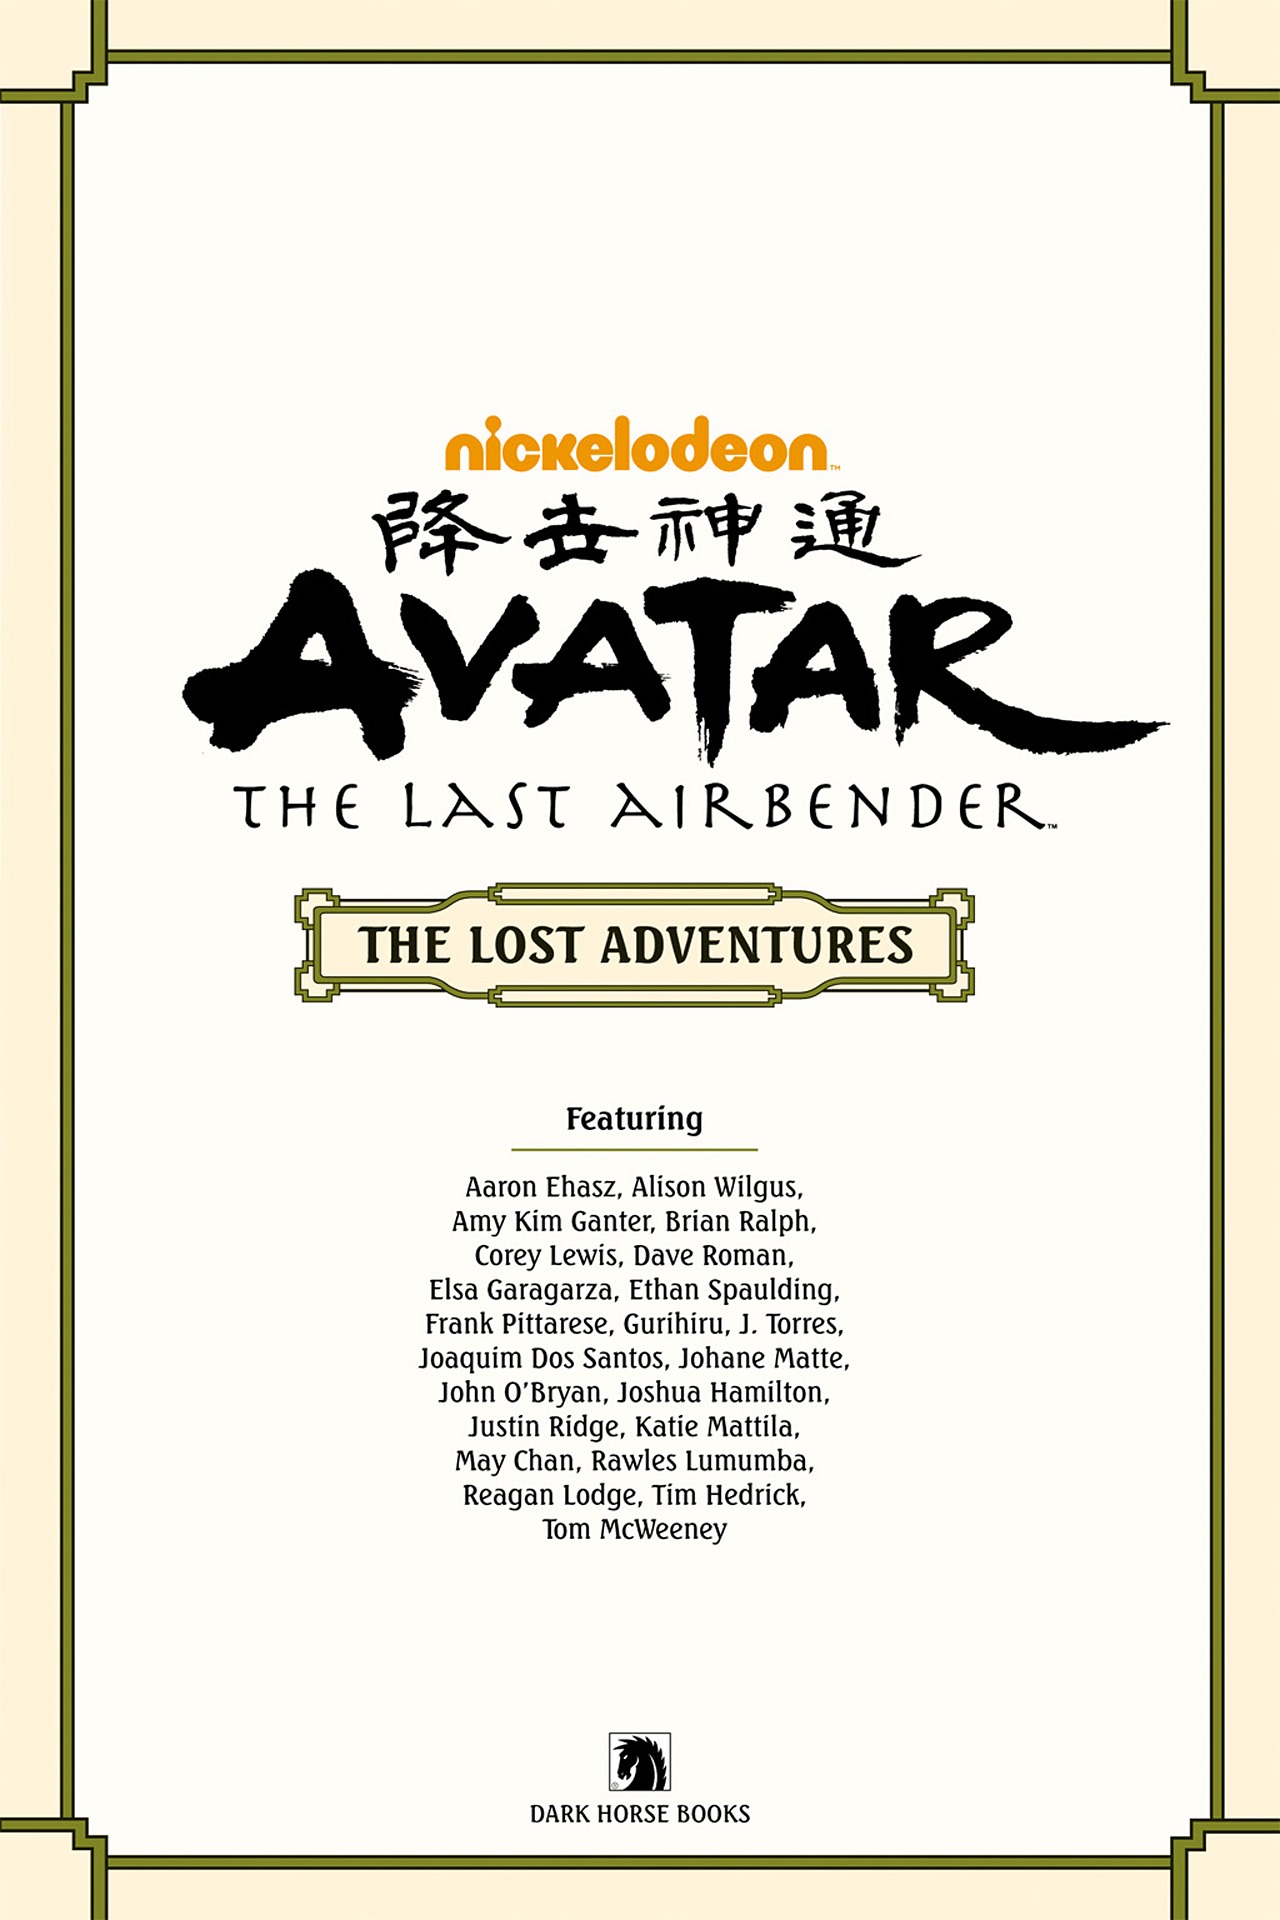 Read online Nickelodeon Avatar: The Last Airbender - The Lost Adventures comic -  Issue # Full - 4